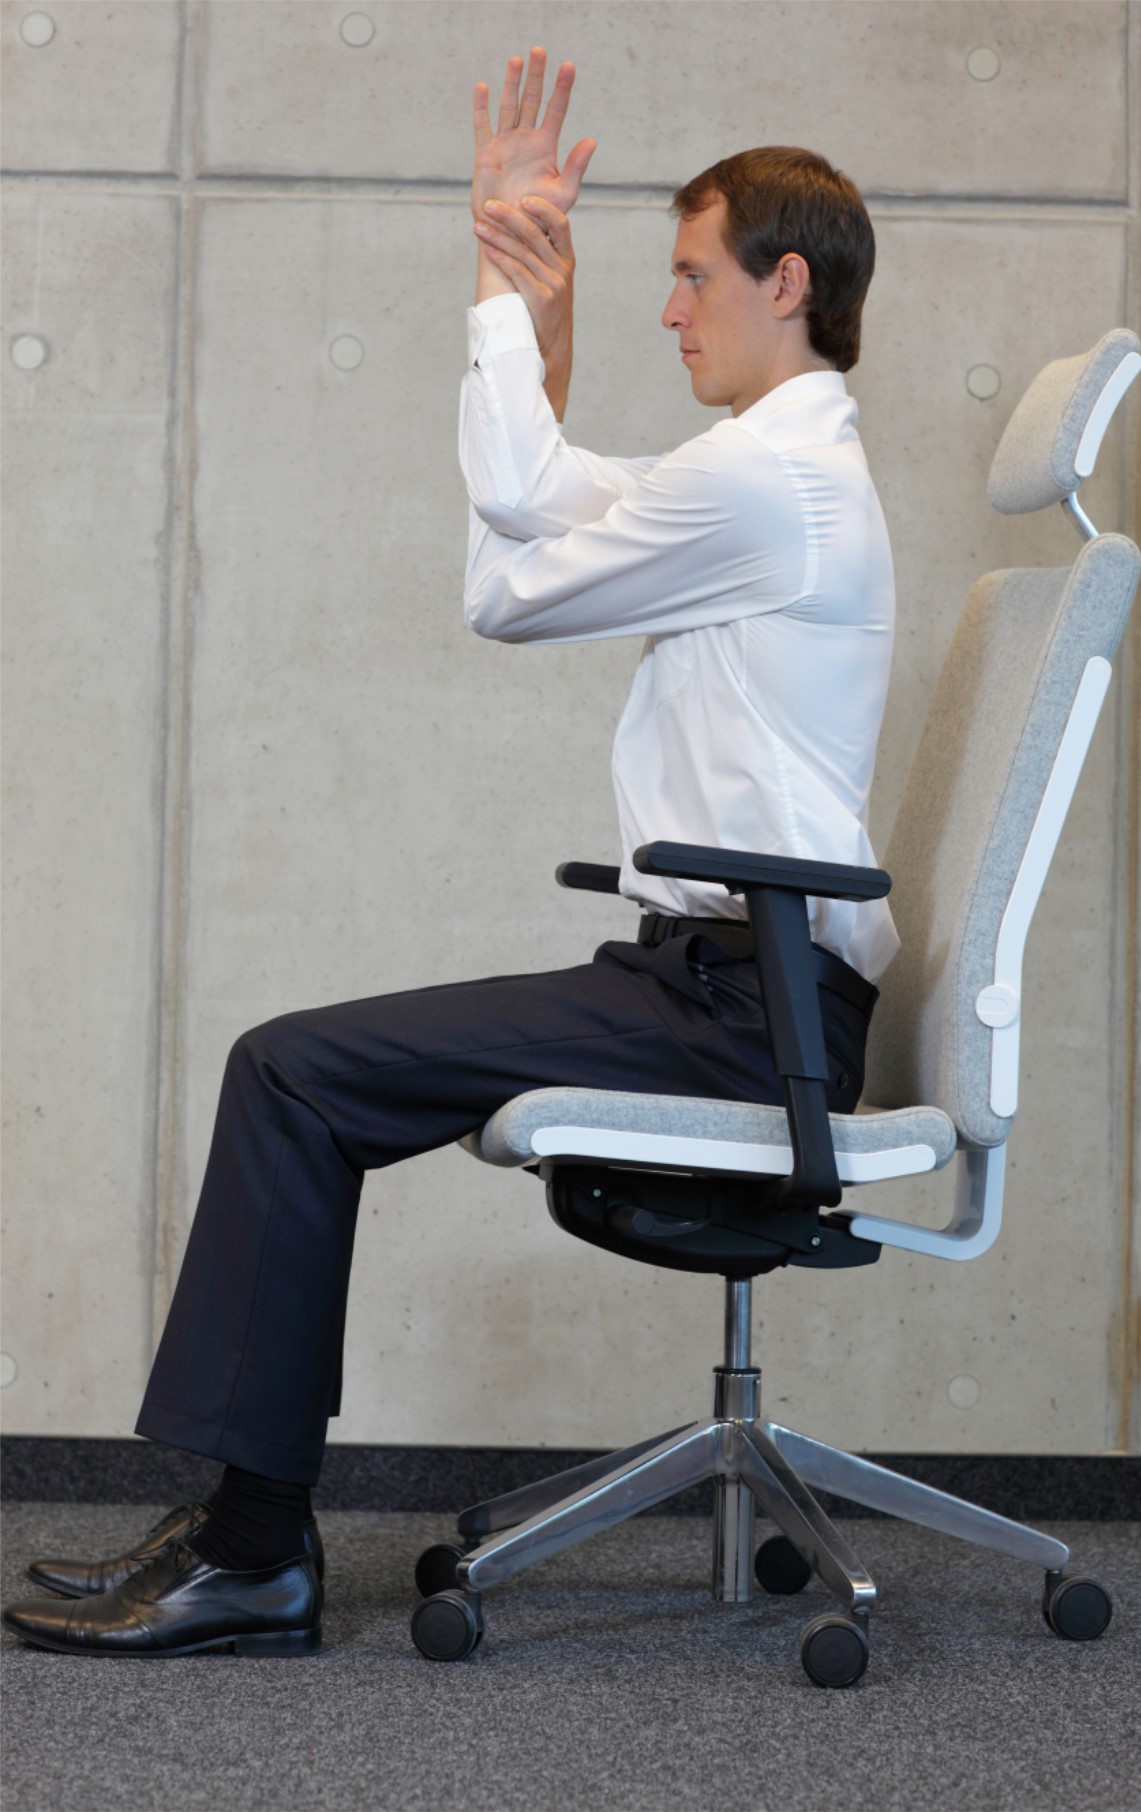 Man sitting in chair stretching arm.